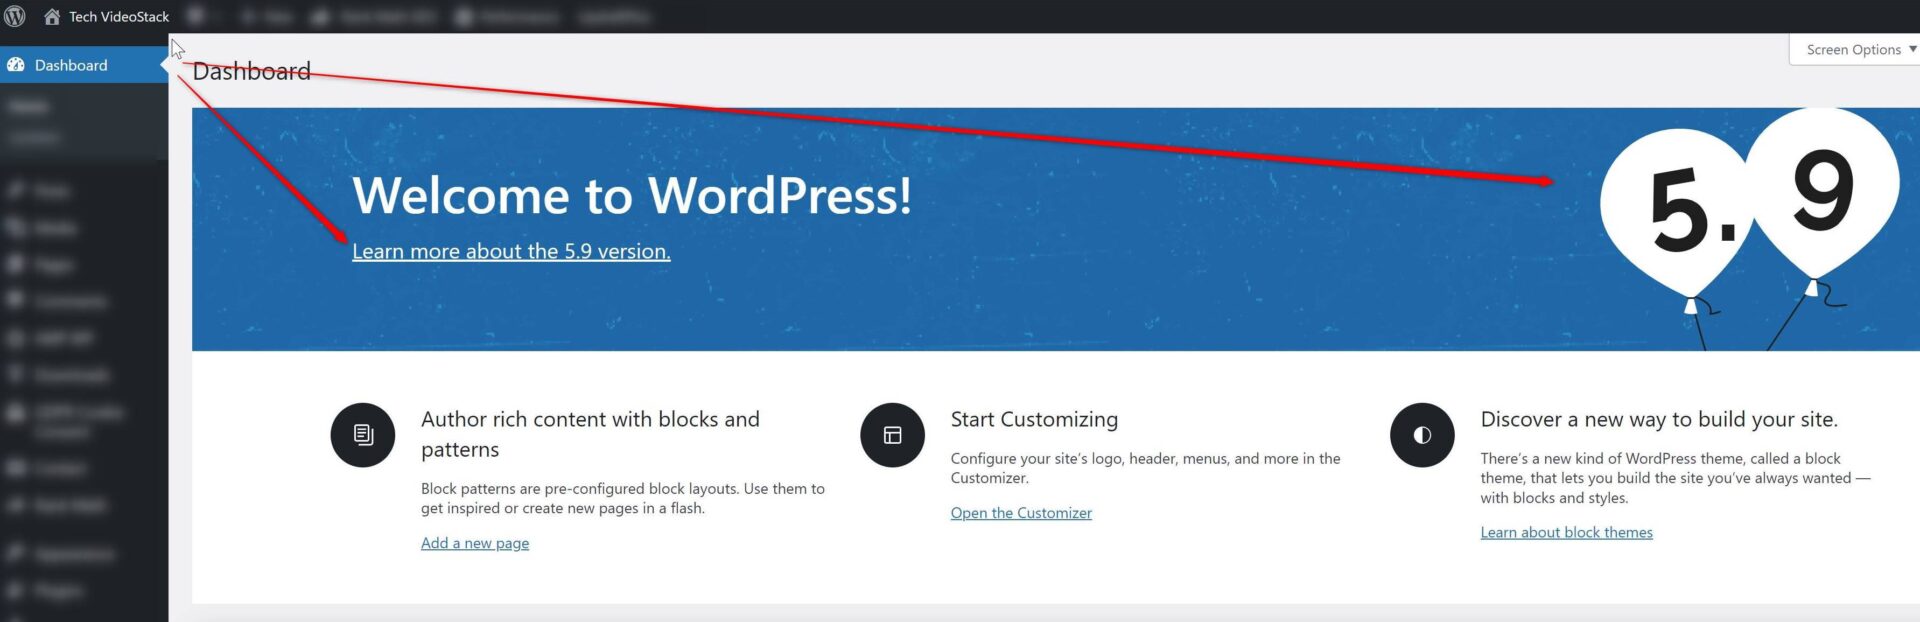 How to Easily Check WordPress Version